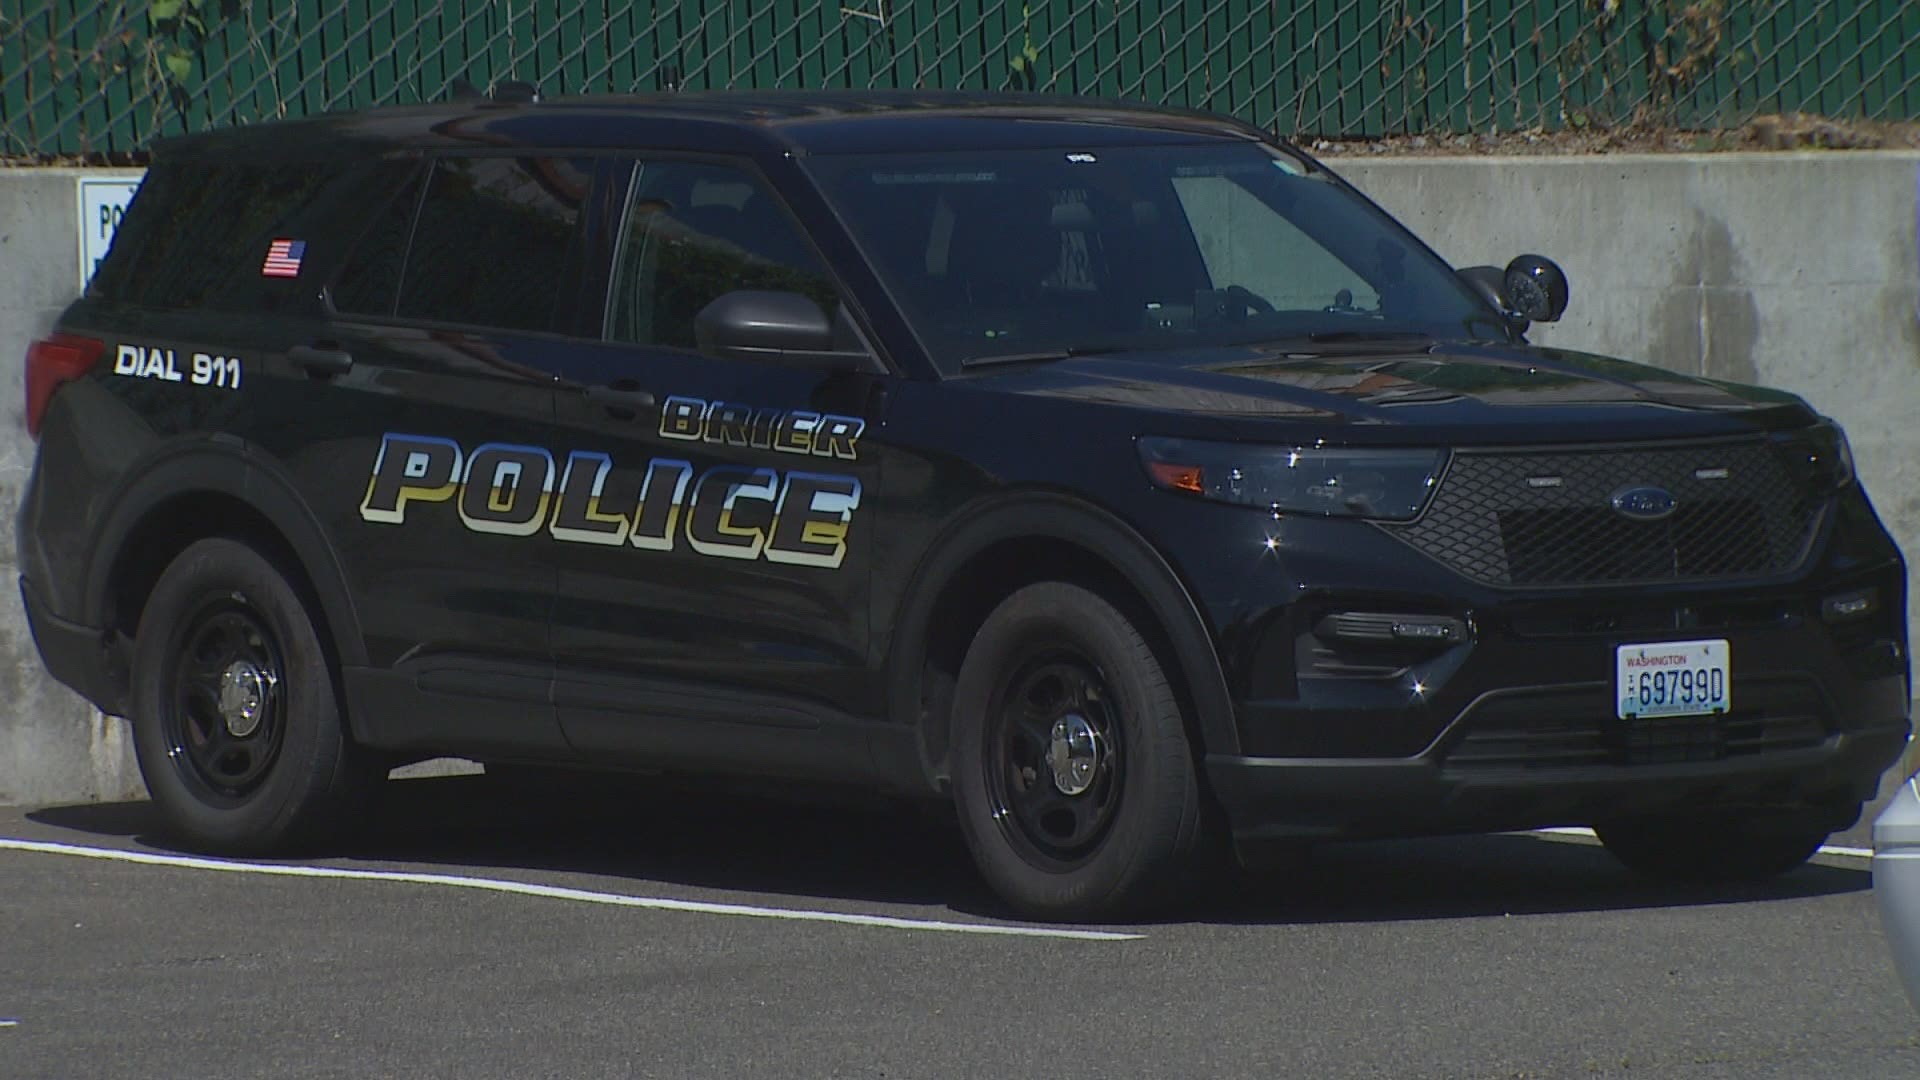 The department usually has six people, but Brier is having trouble recruiting and retaining officers. The city is contracting with Snohomish County for coverage.